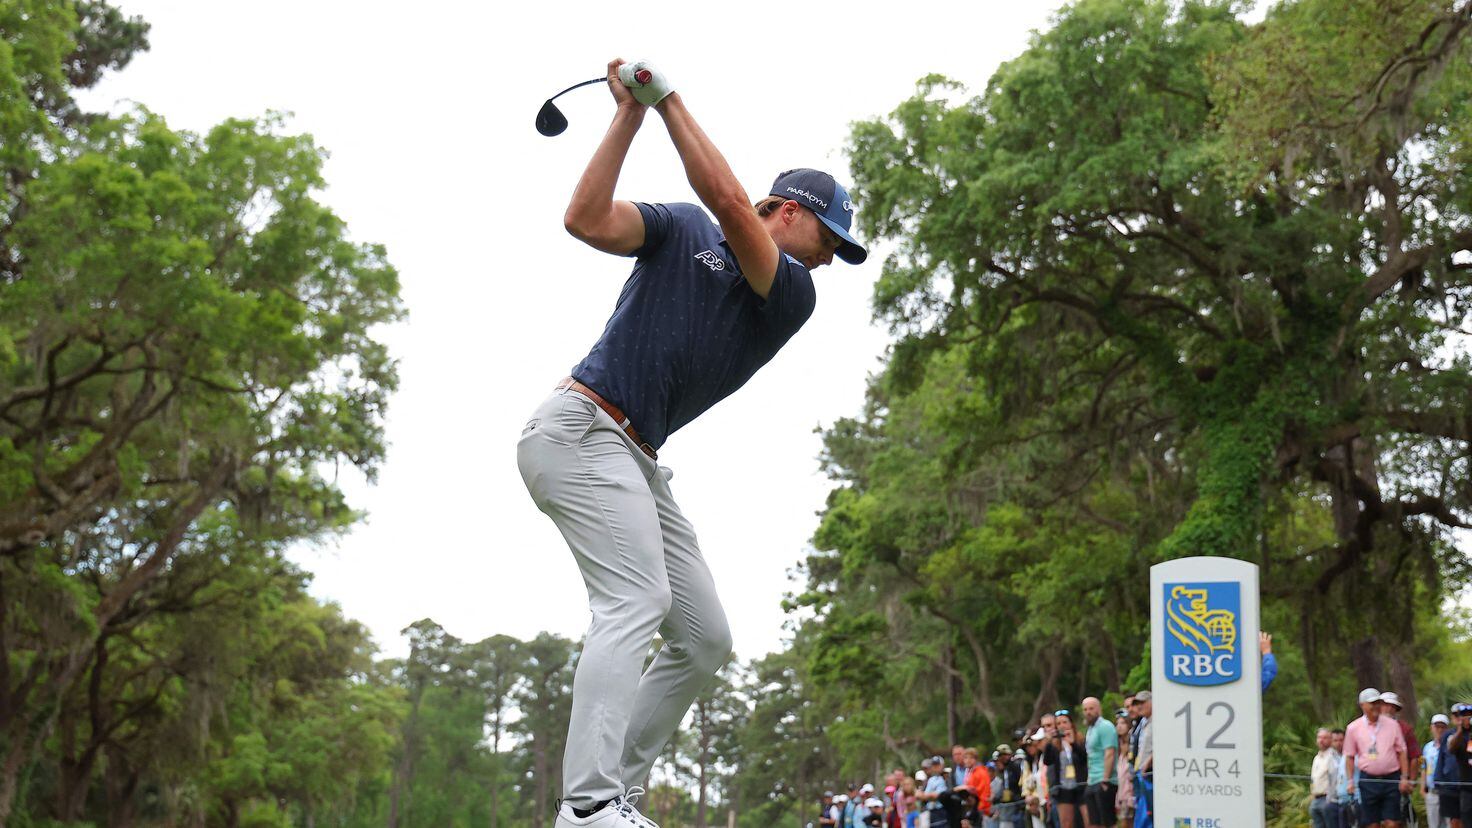 2023 RBC Heritage Thursday, round 1 tee times, field, pairings, and